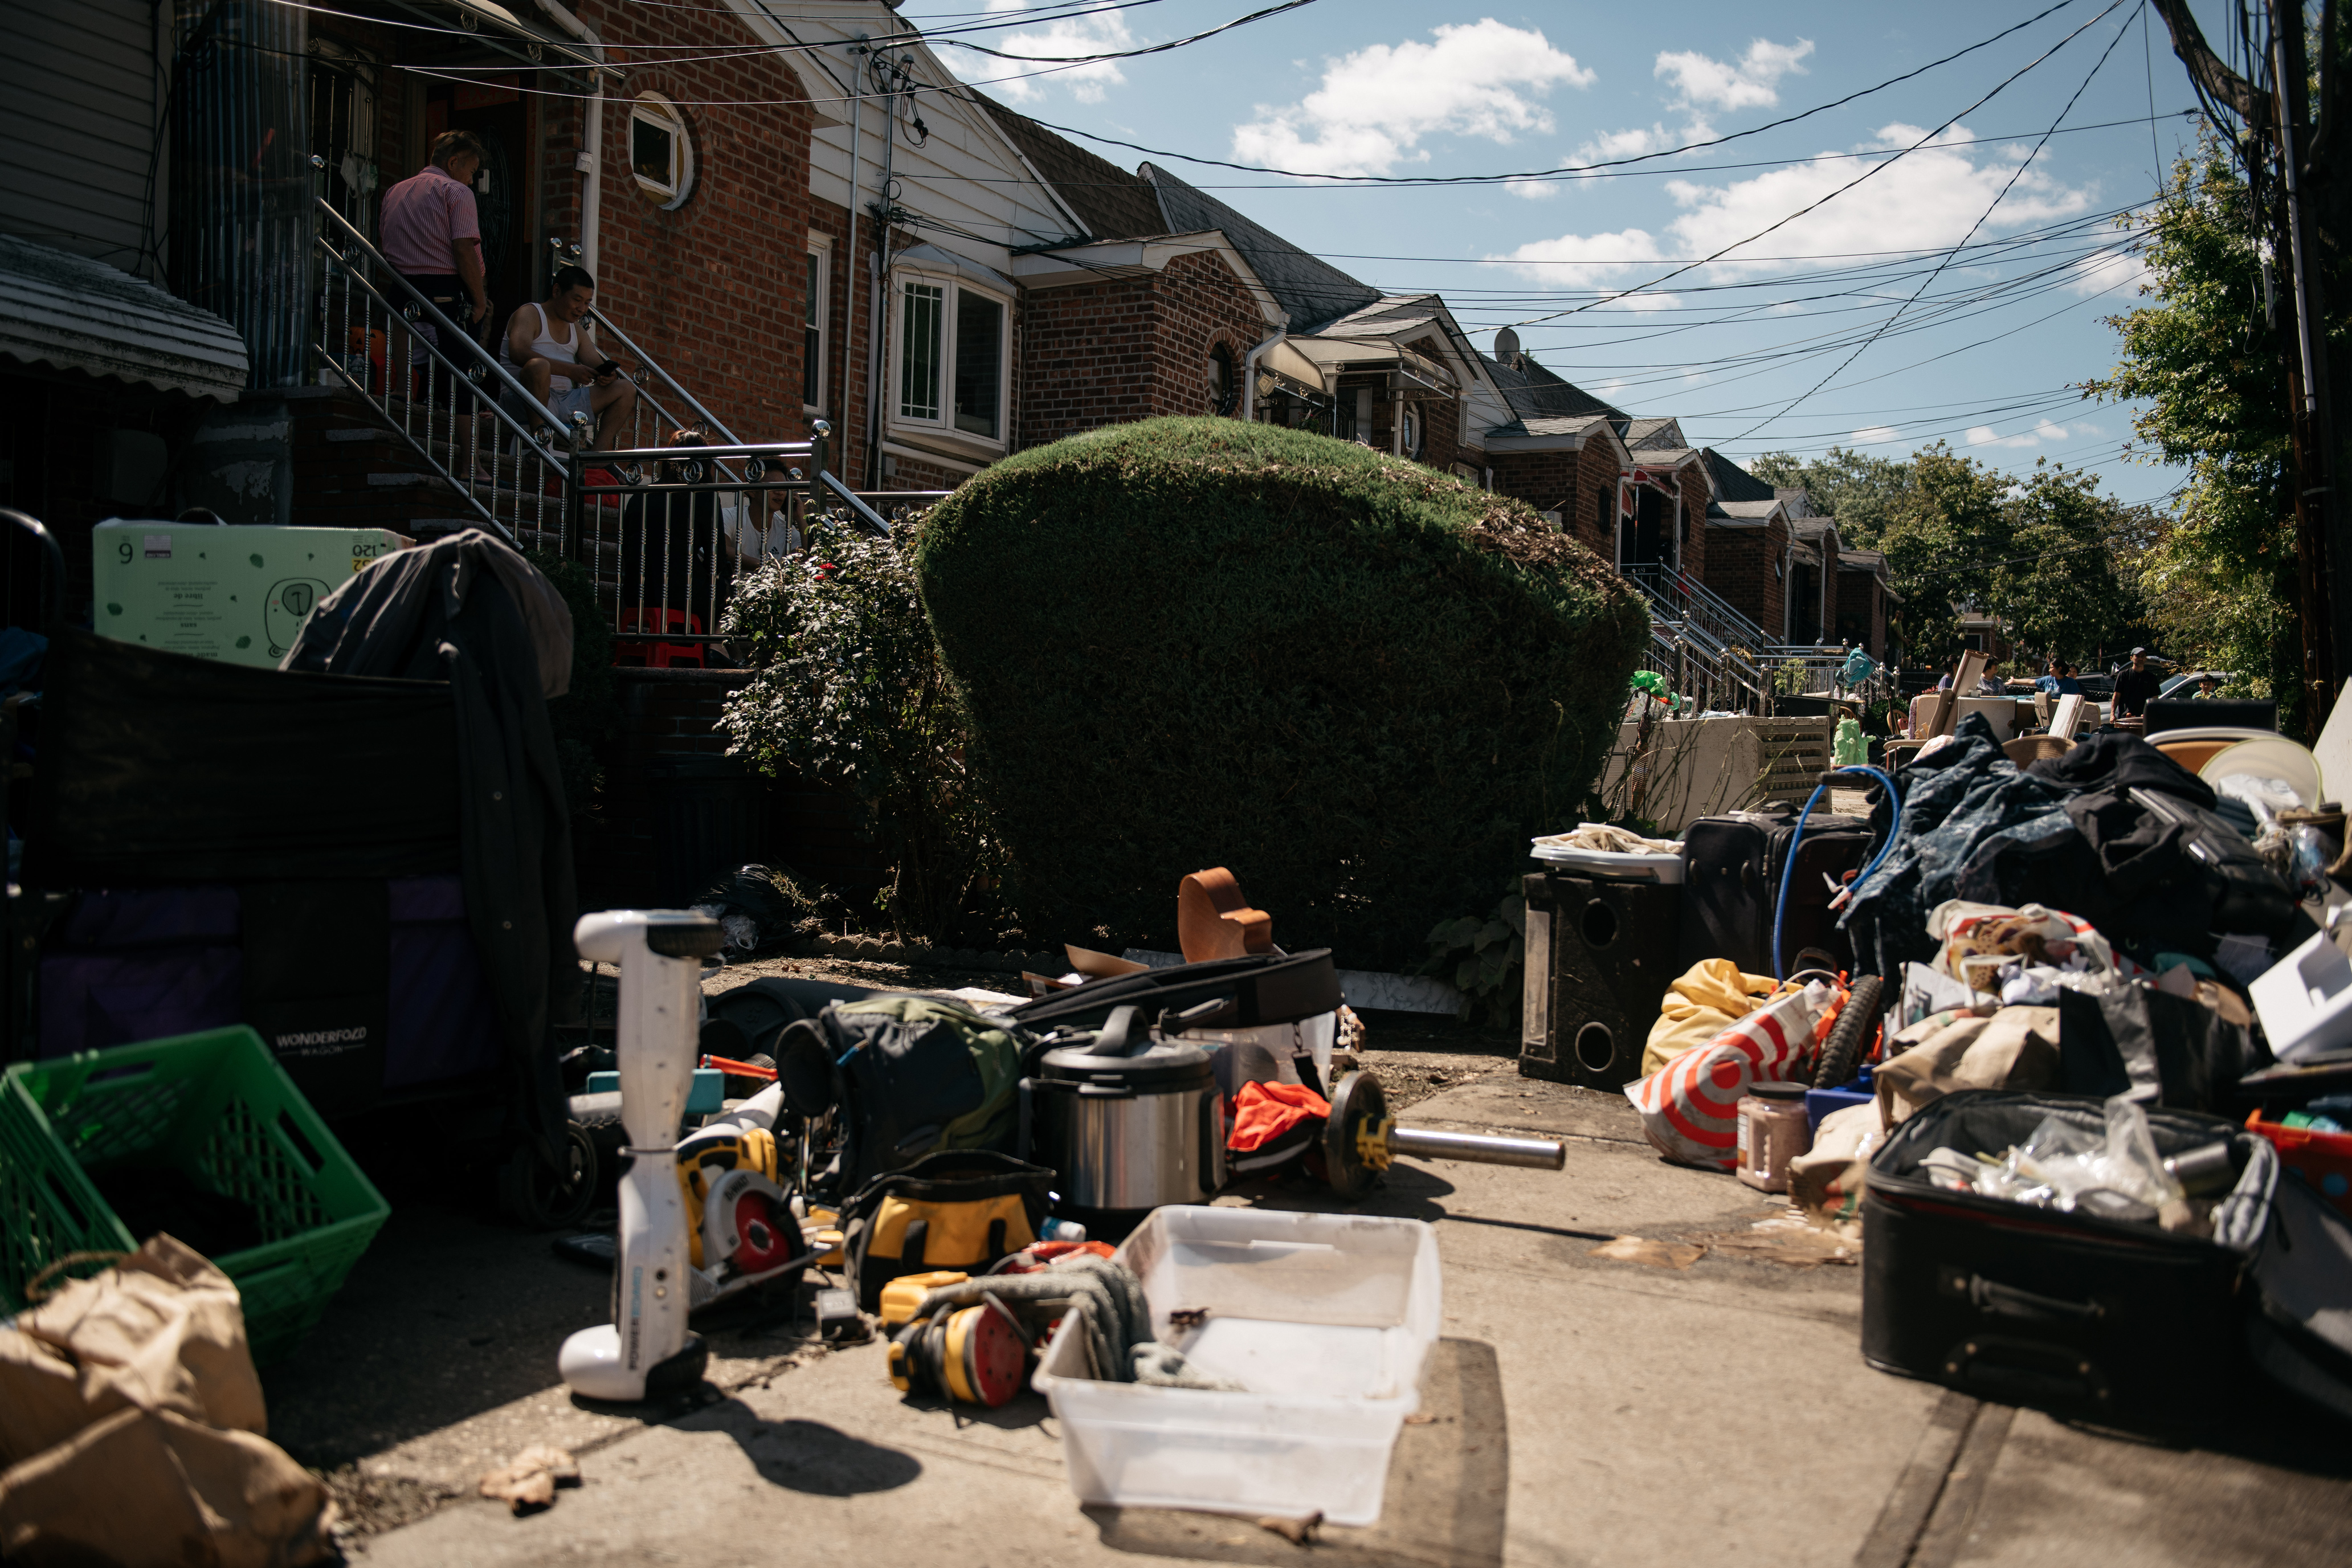 Residents sort through items damaged and destroyed by flooding on Thursday, September 2, in the Flushing neighborhood of Queens, New York City.